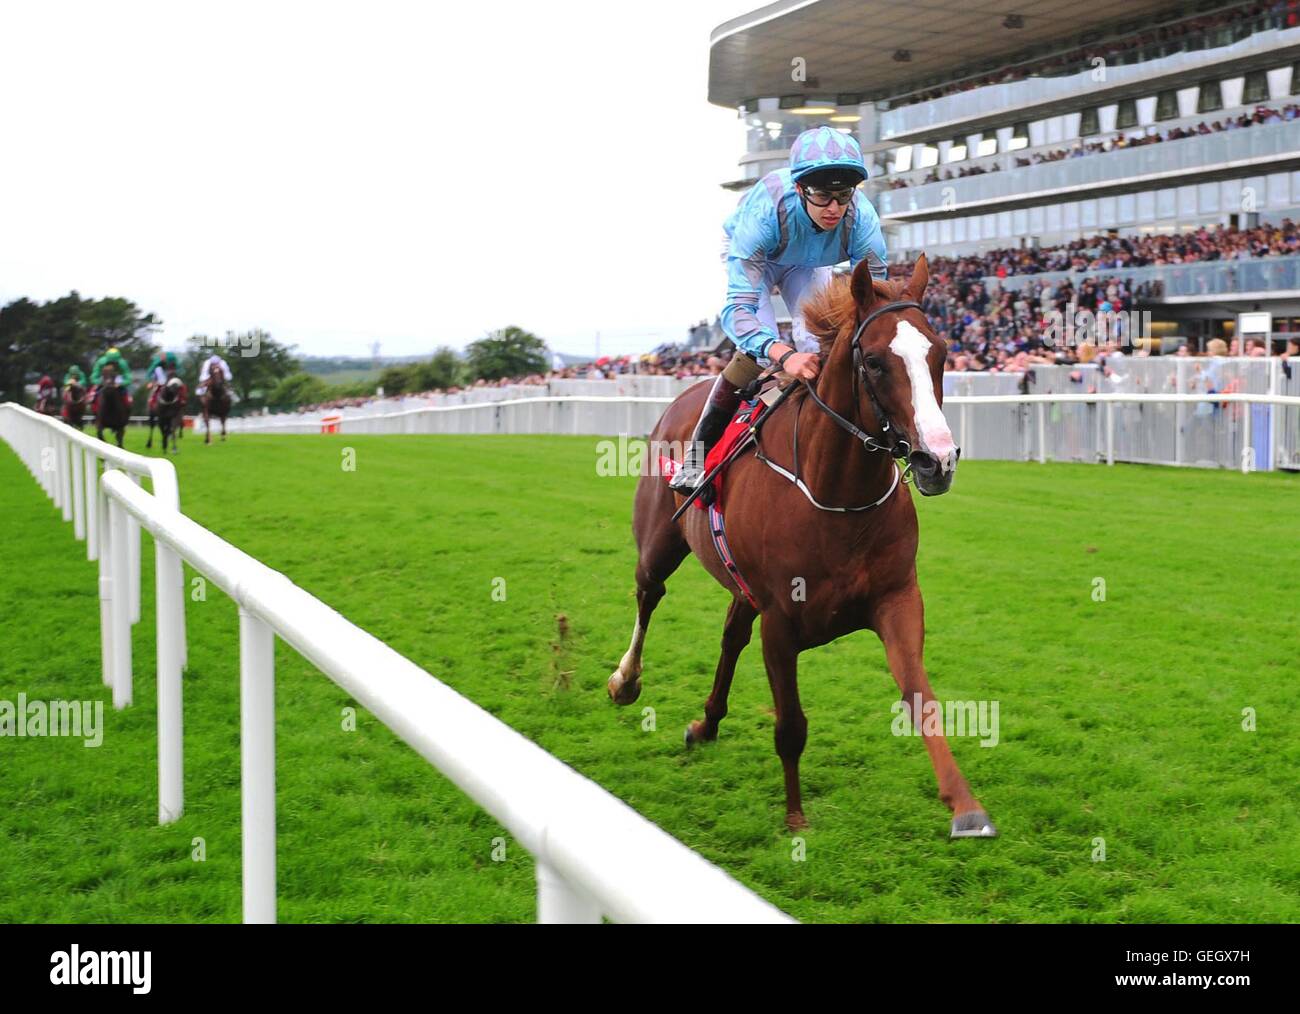 motherland ridden by Donnacha O'Brien win the Eventus Handicap during day one of the Galway Festival in Ballybrit, Republic of Ireland. Stock Photo